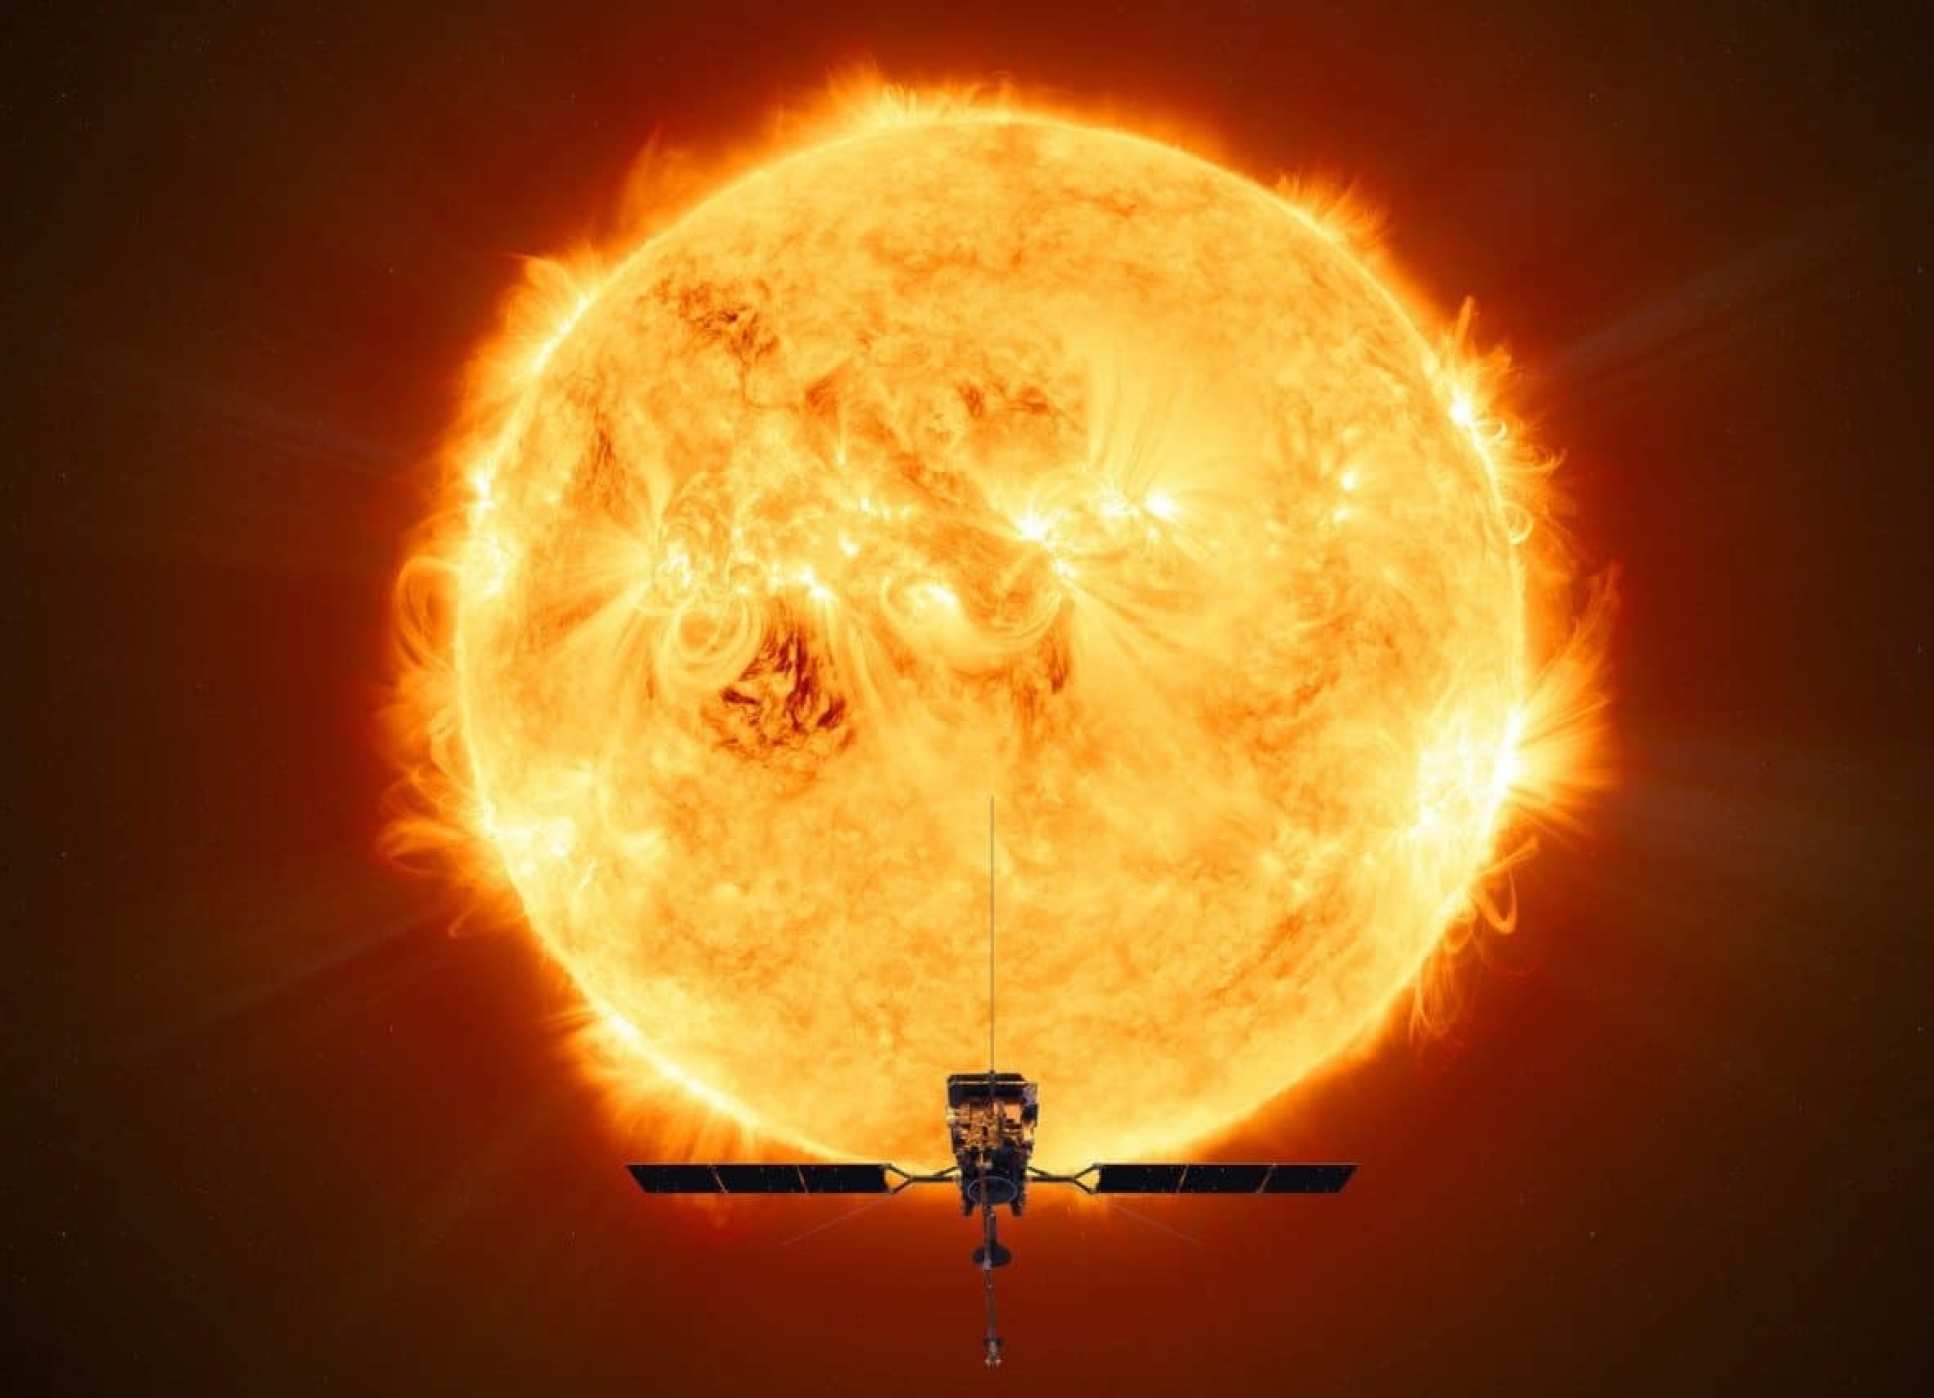 Illustration of a spacecraft facing the sun